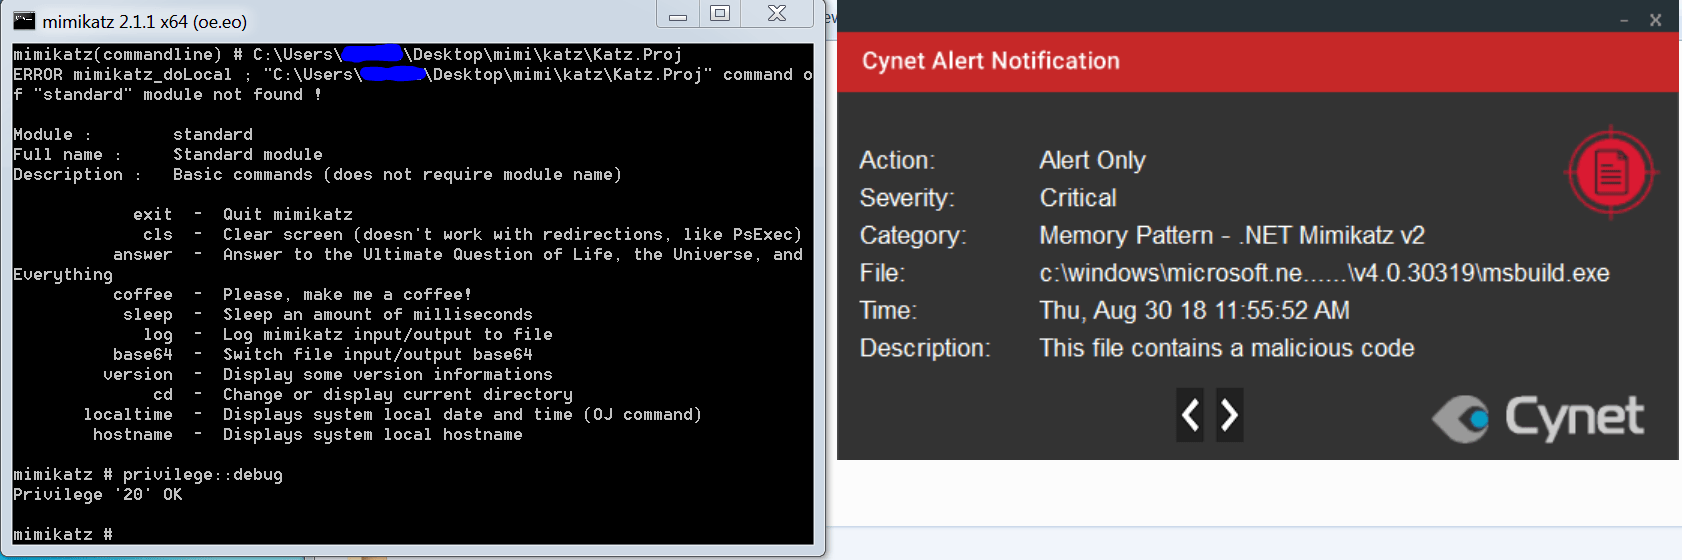 mimikatz 221 detection and alert by cynet360